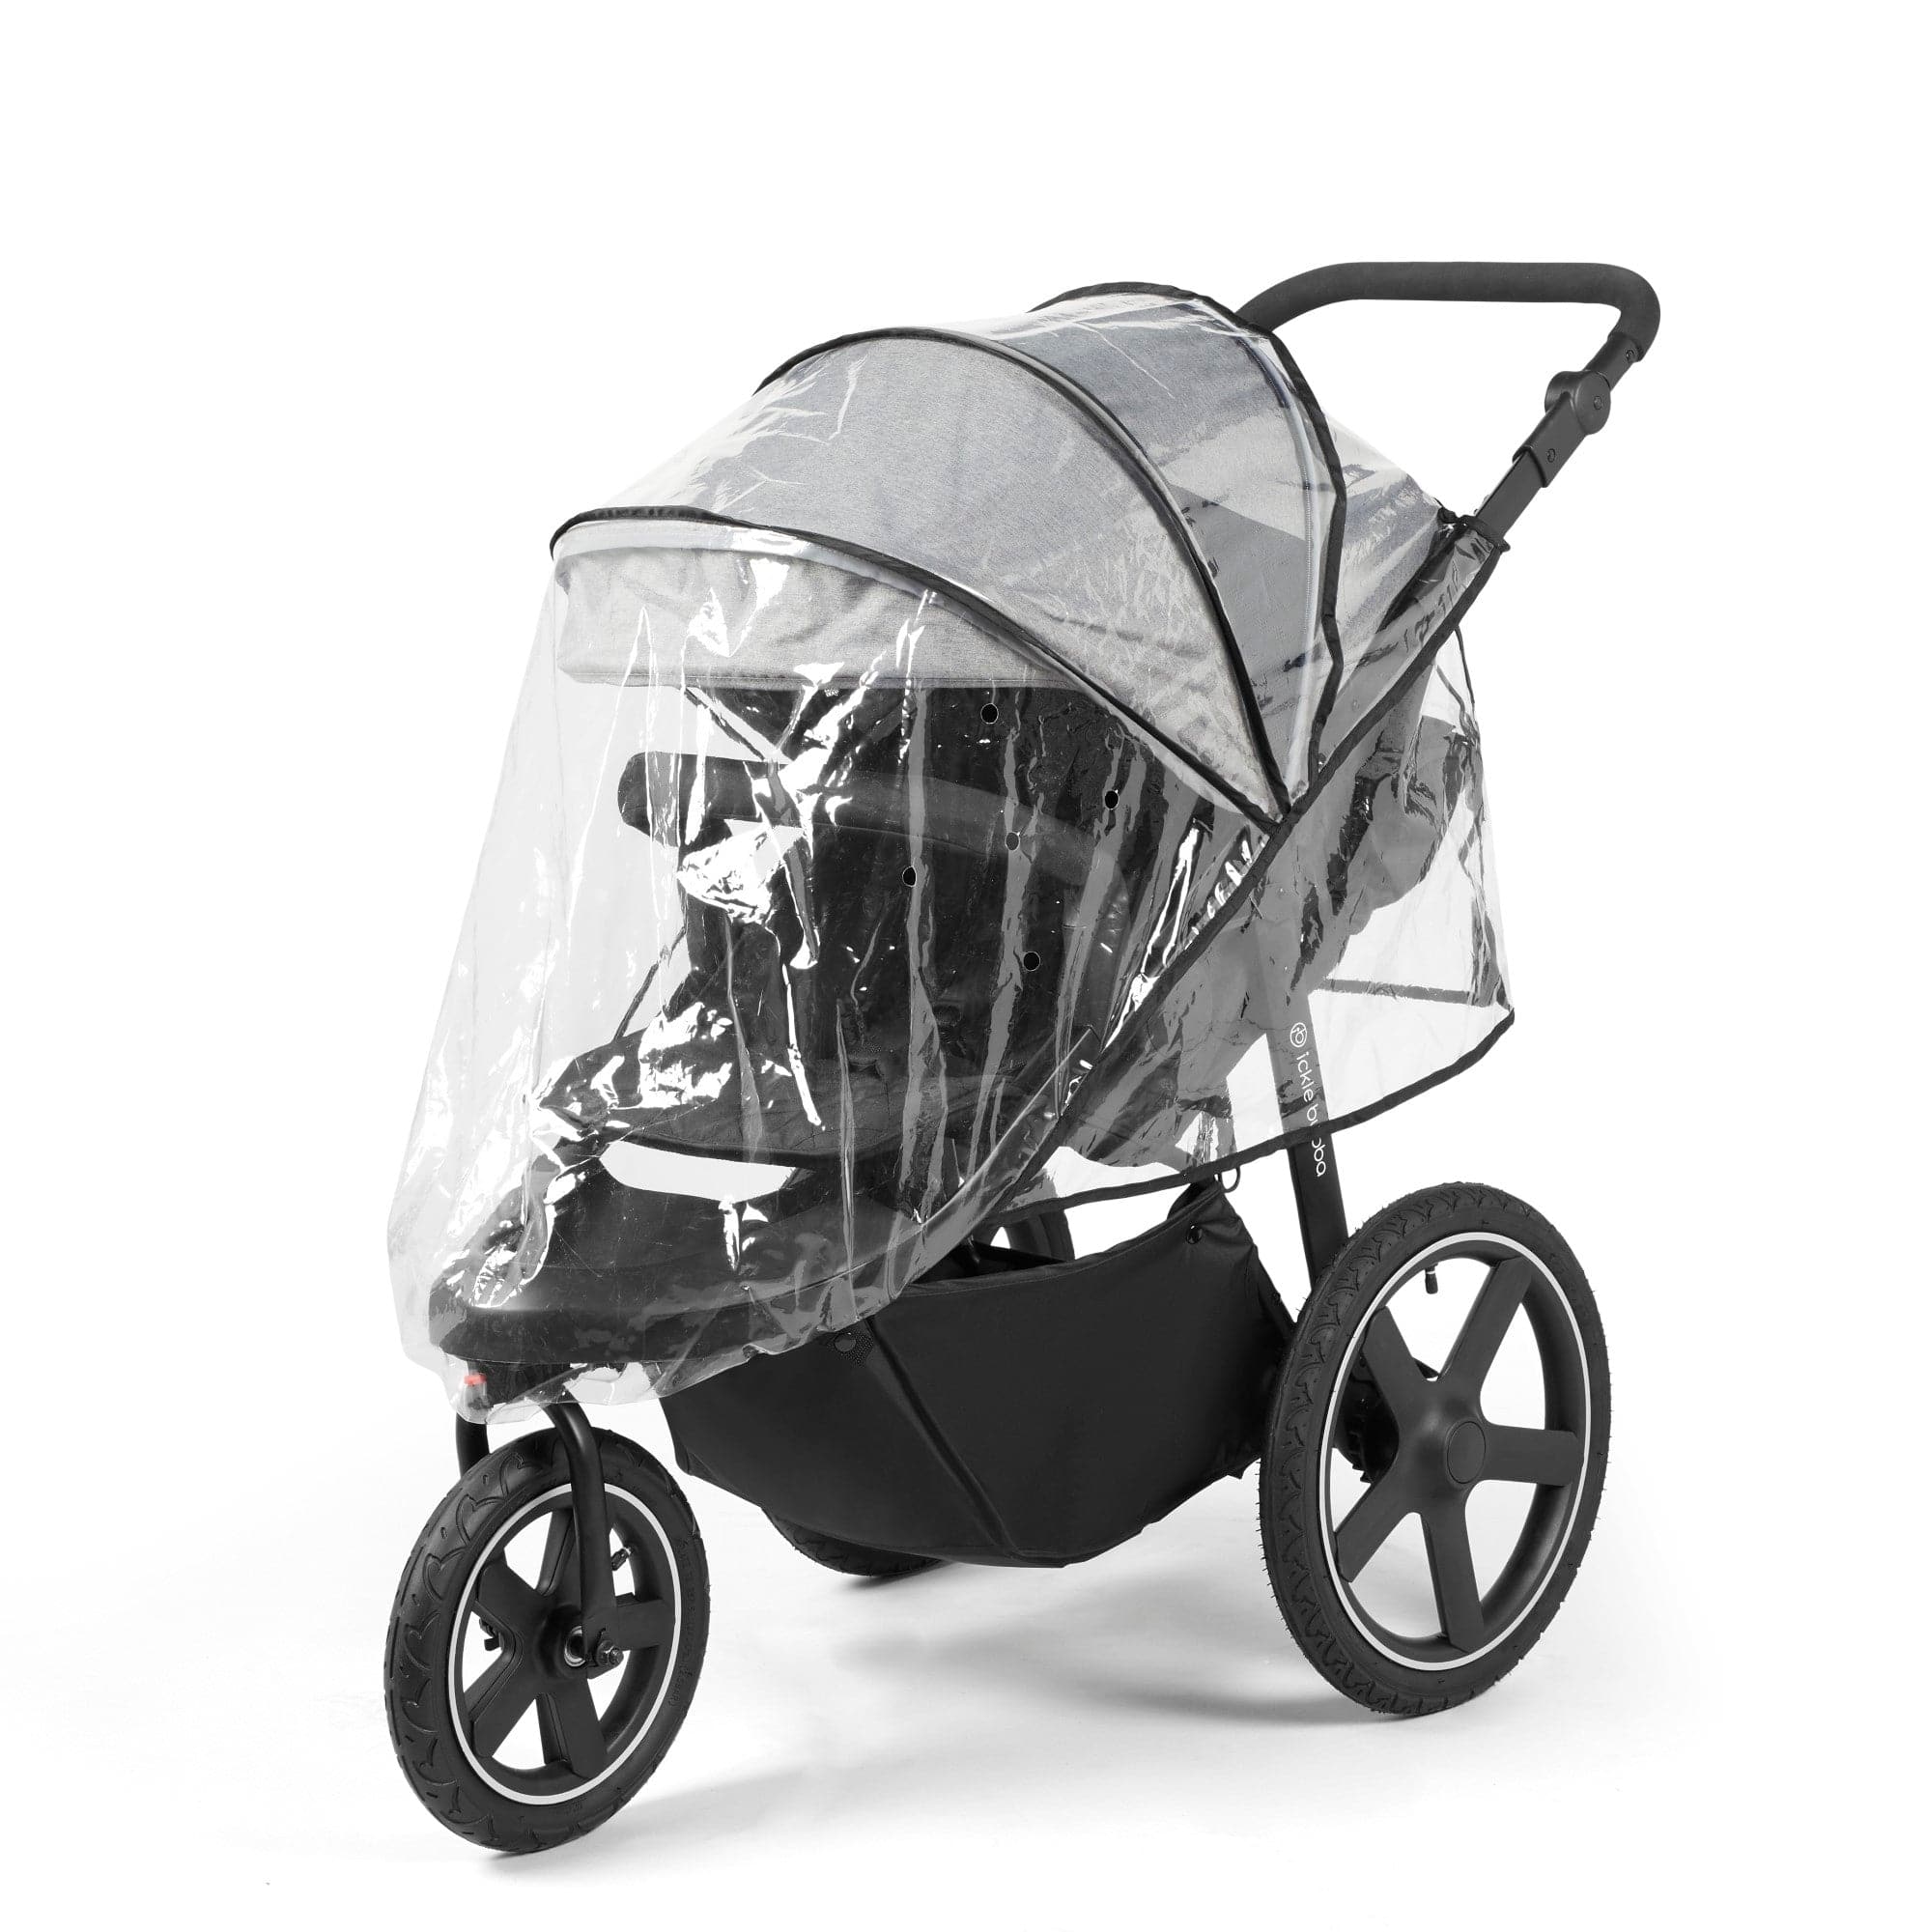 Ickle Bubba Venus Prime Jogger 3 Wheel Stroller - Space Grey - For Your Little One